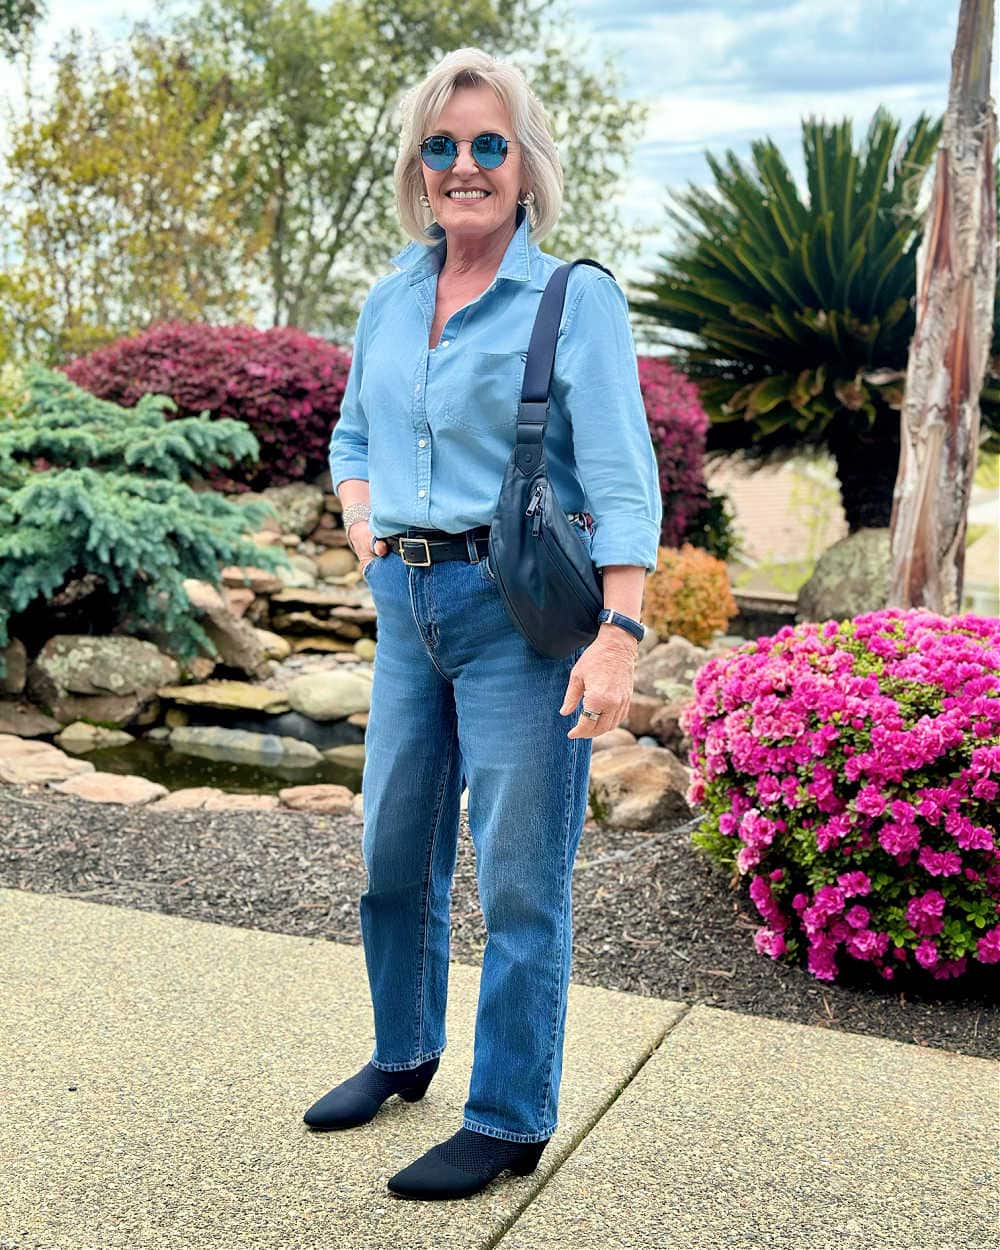 Nearing 60 what can I wear instead of jeans